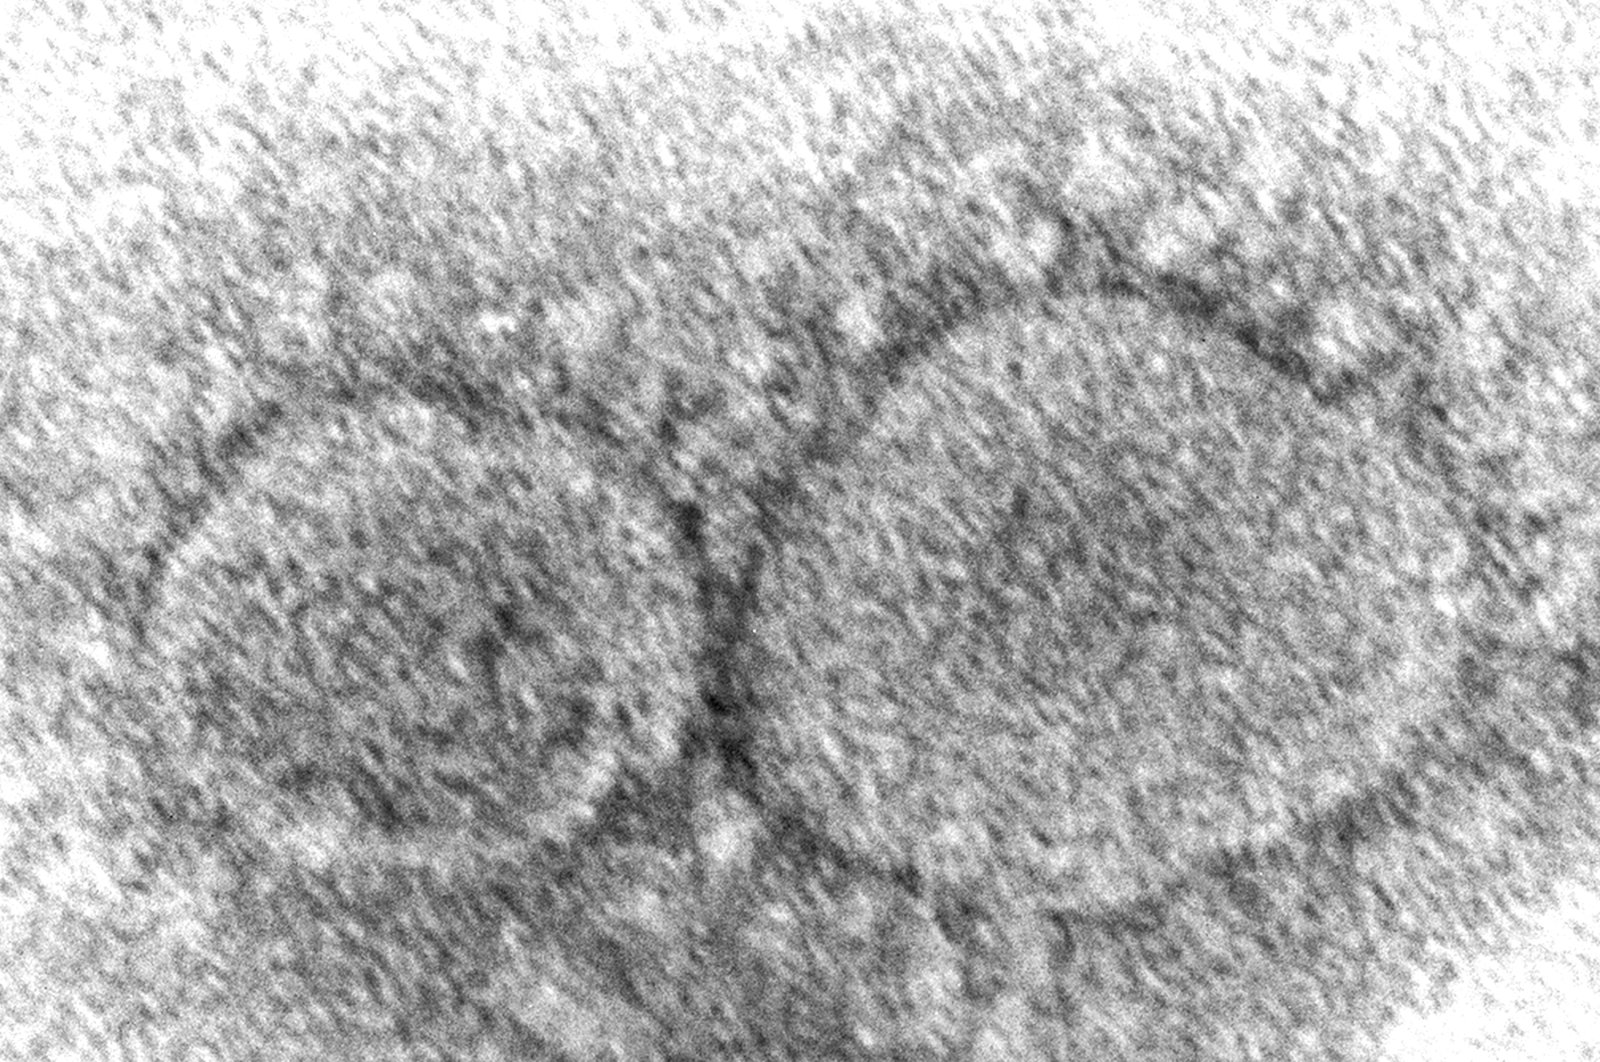 An electron microscope image shows SARS-CoV-2 virus particles. (AP Photo)